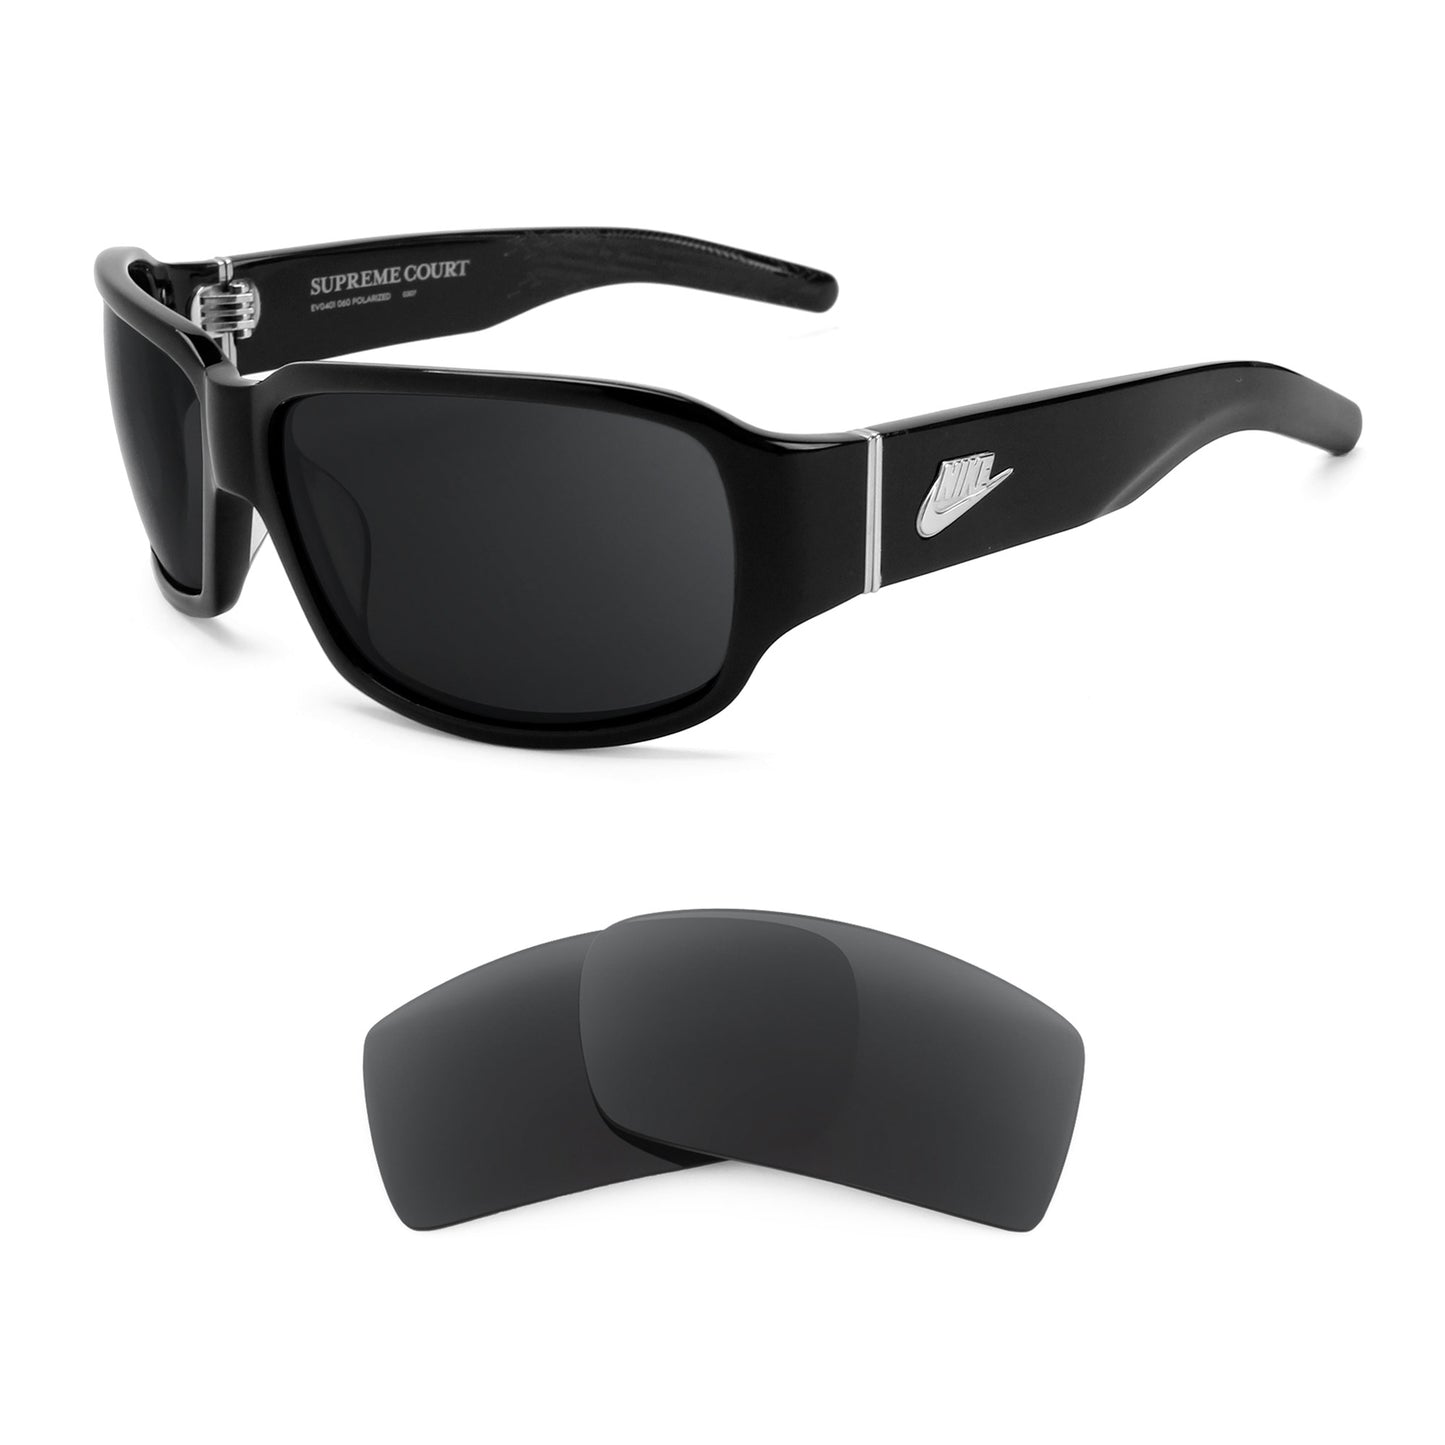 Nike Supreme Court sunglasses with replacement lenses